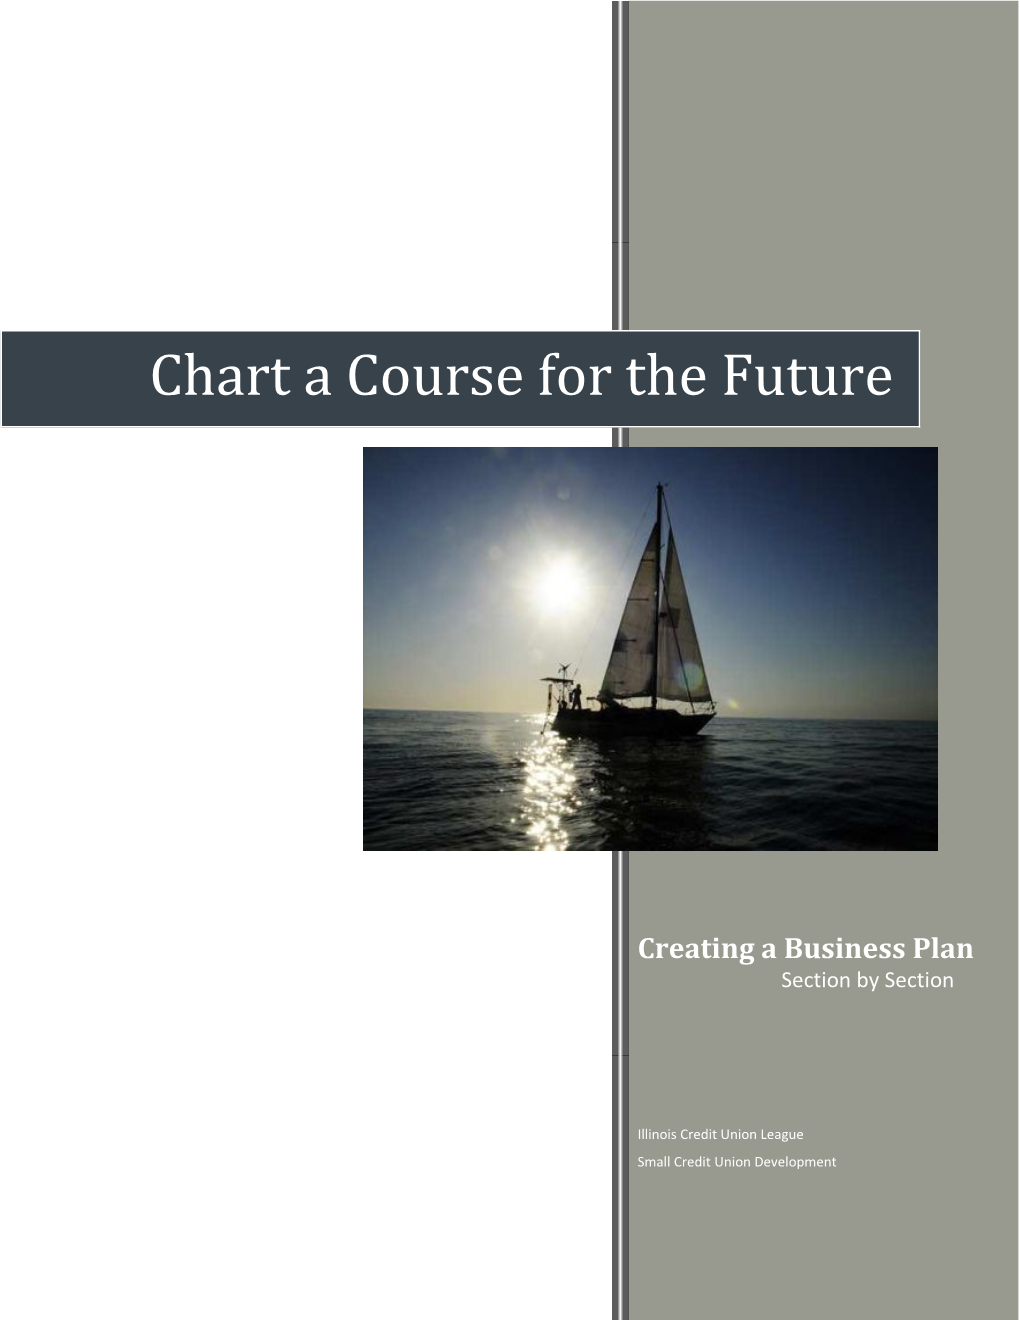 Chart a Course for the Future